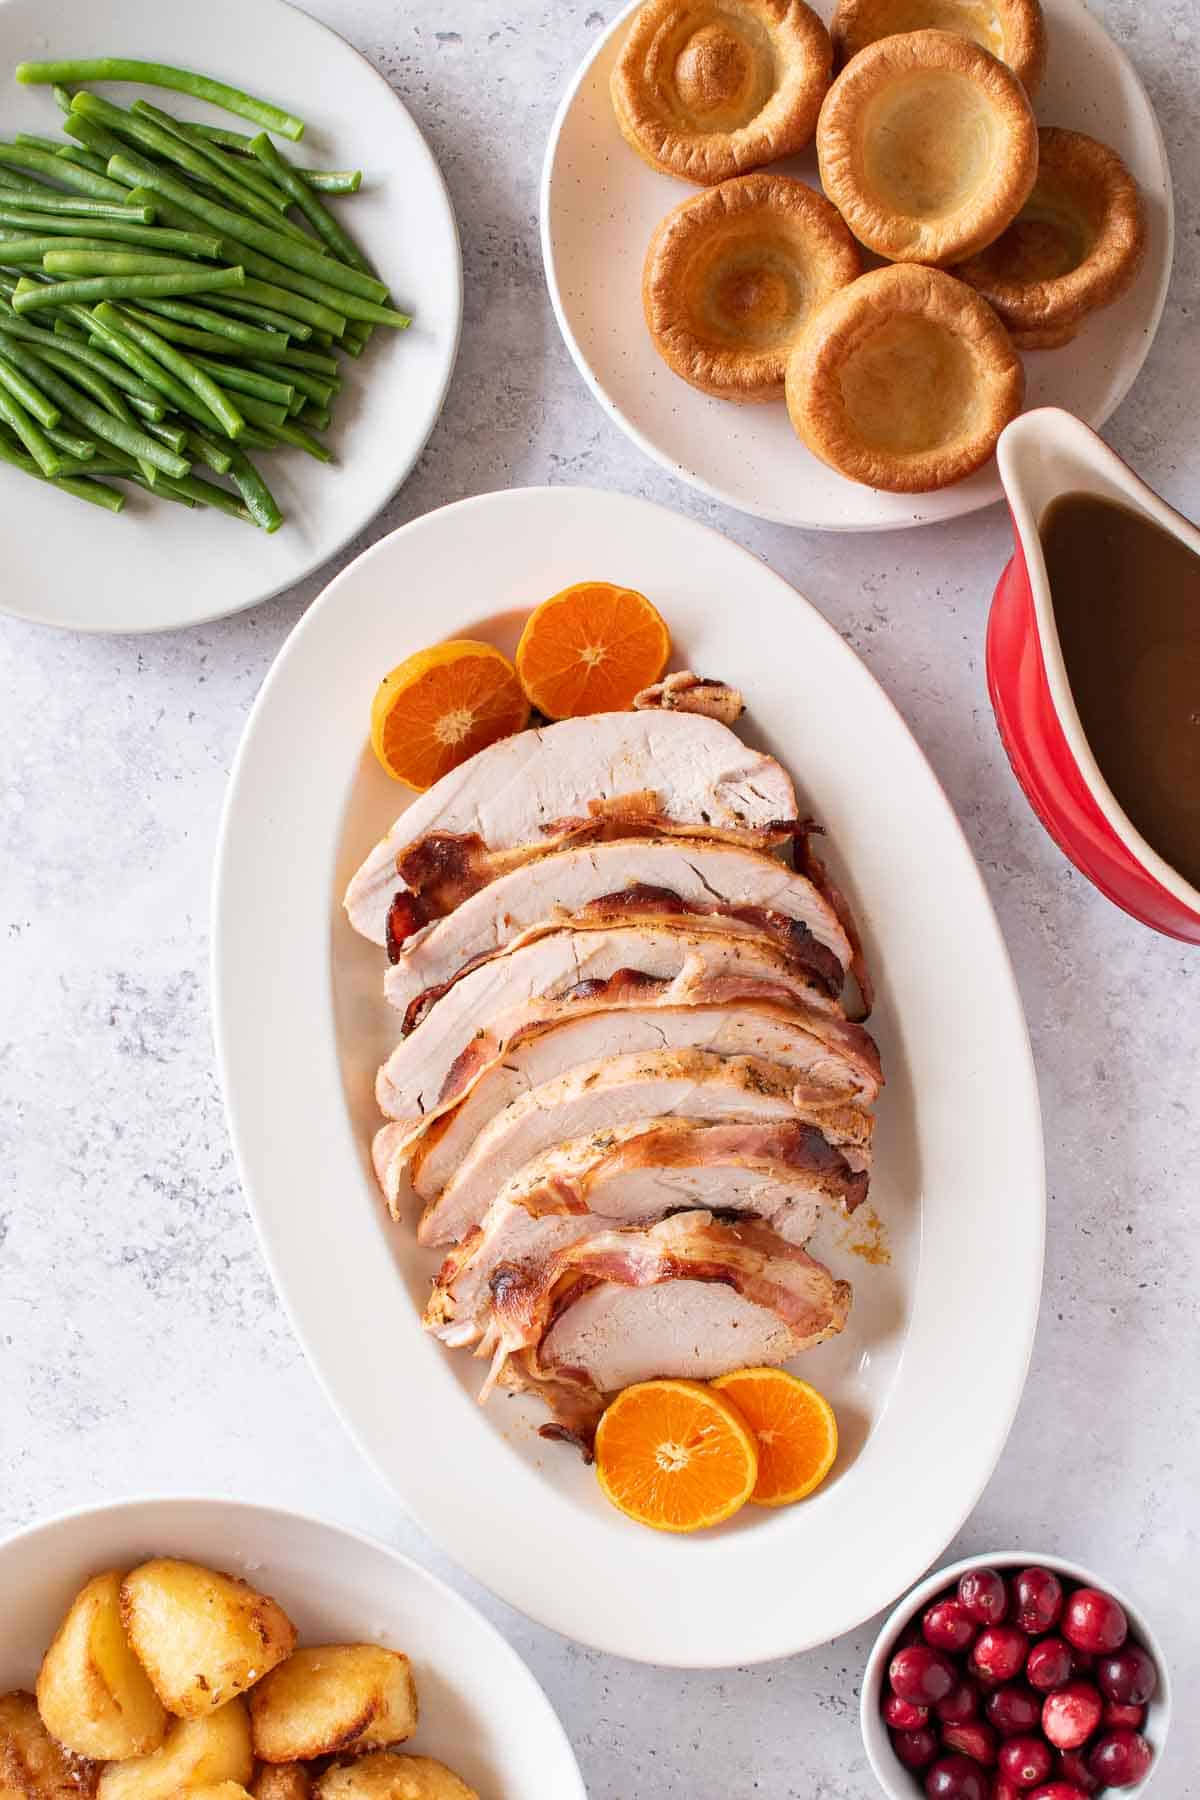 Sliced turkey breast on a serving platter, with yorkshire puddings, gravy, green beans, cranberries and potatoes on the side.